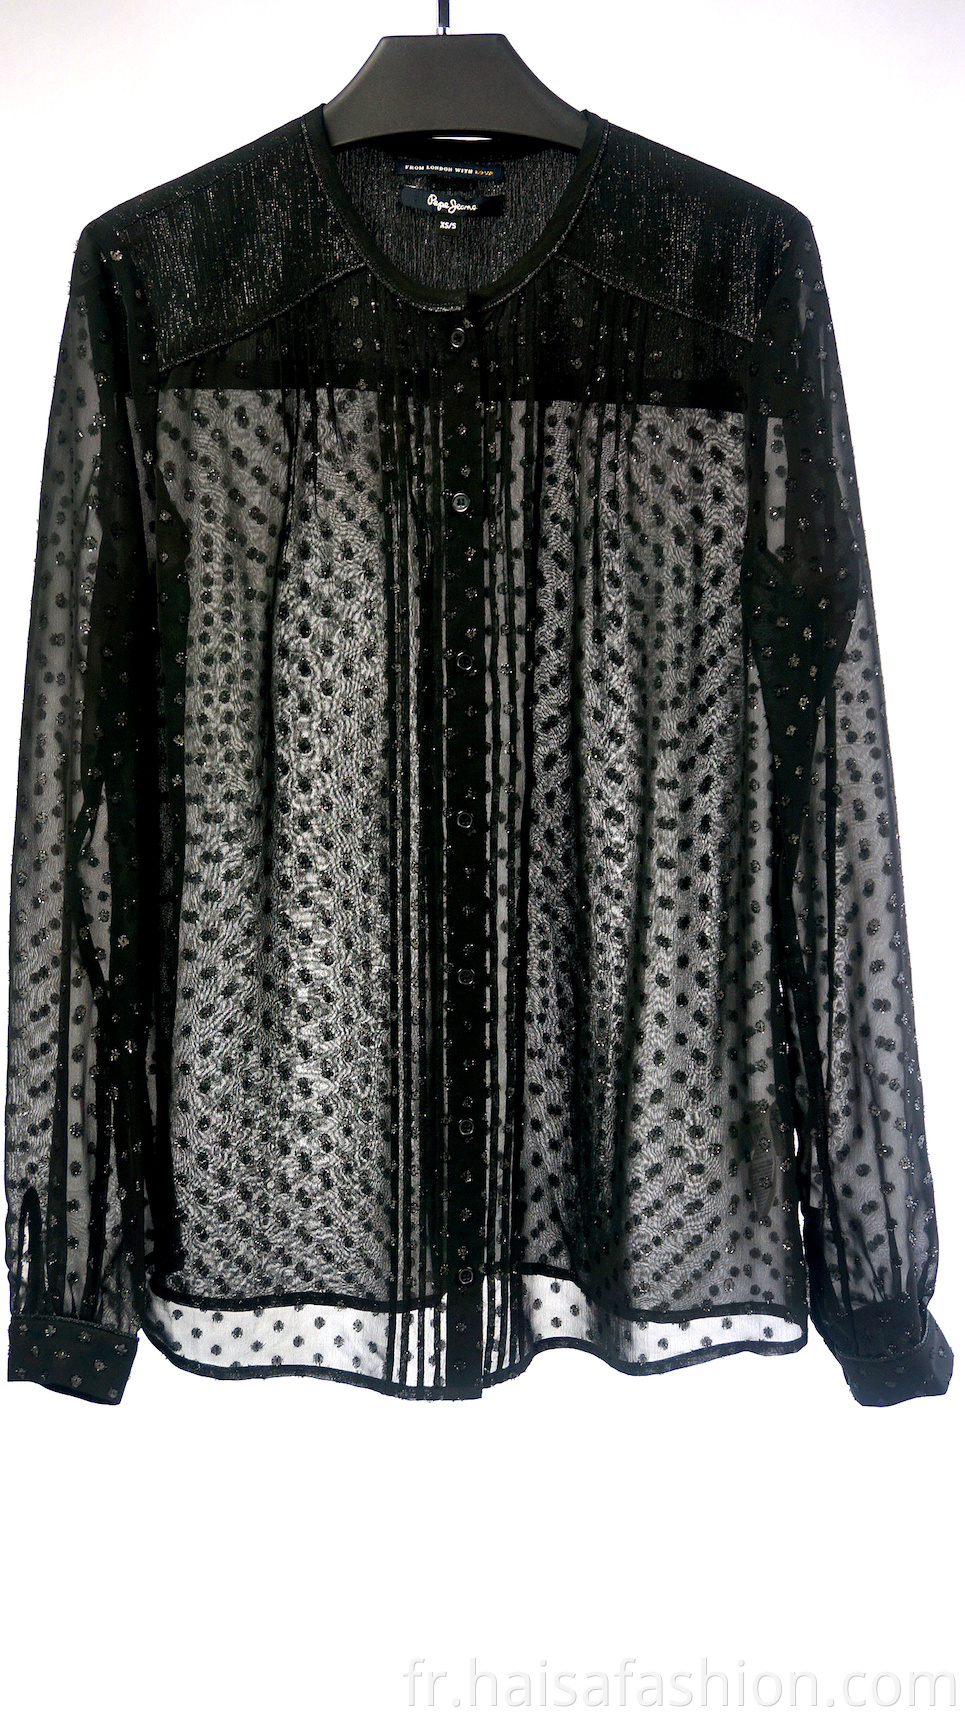 Black Translucent Long-sleeved Blouse For Ladies